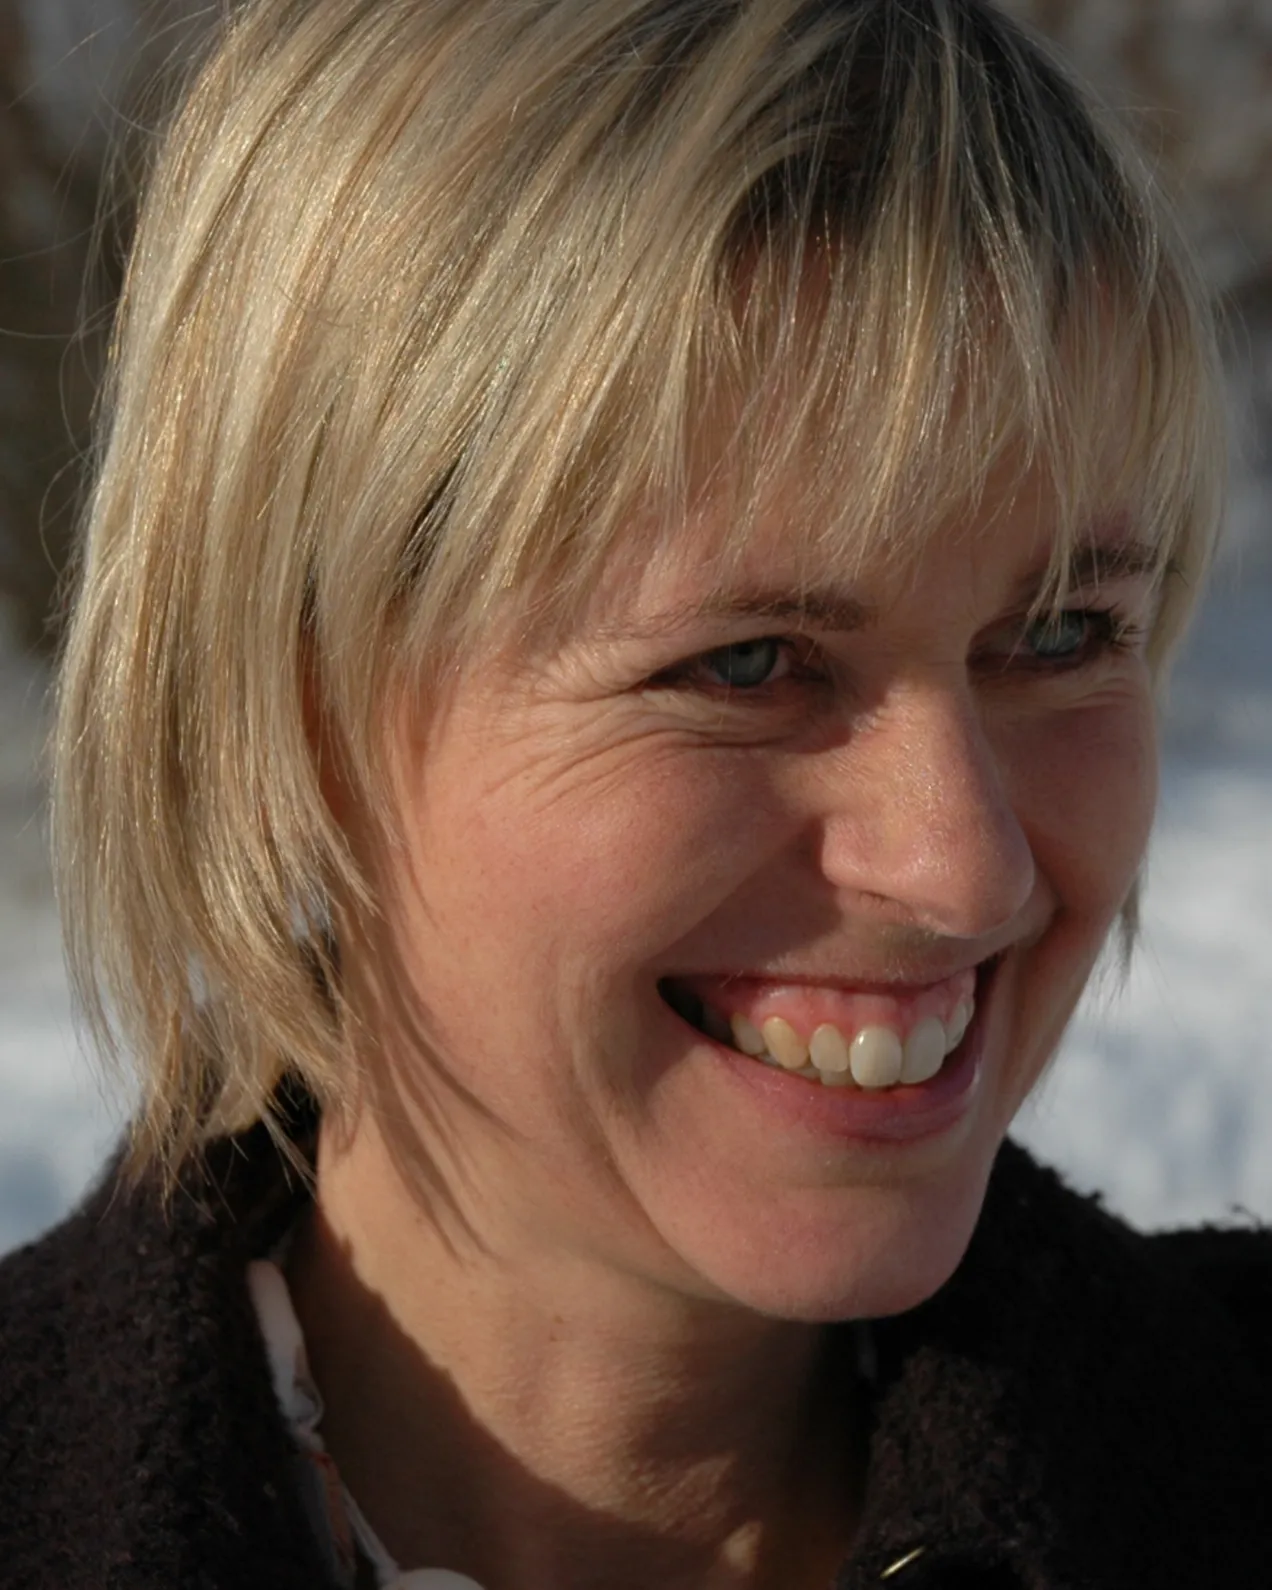 A close-up of a woman smiling